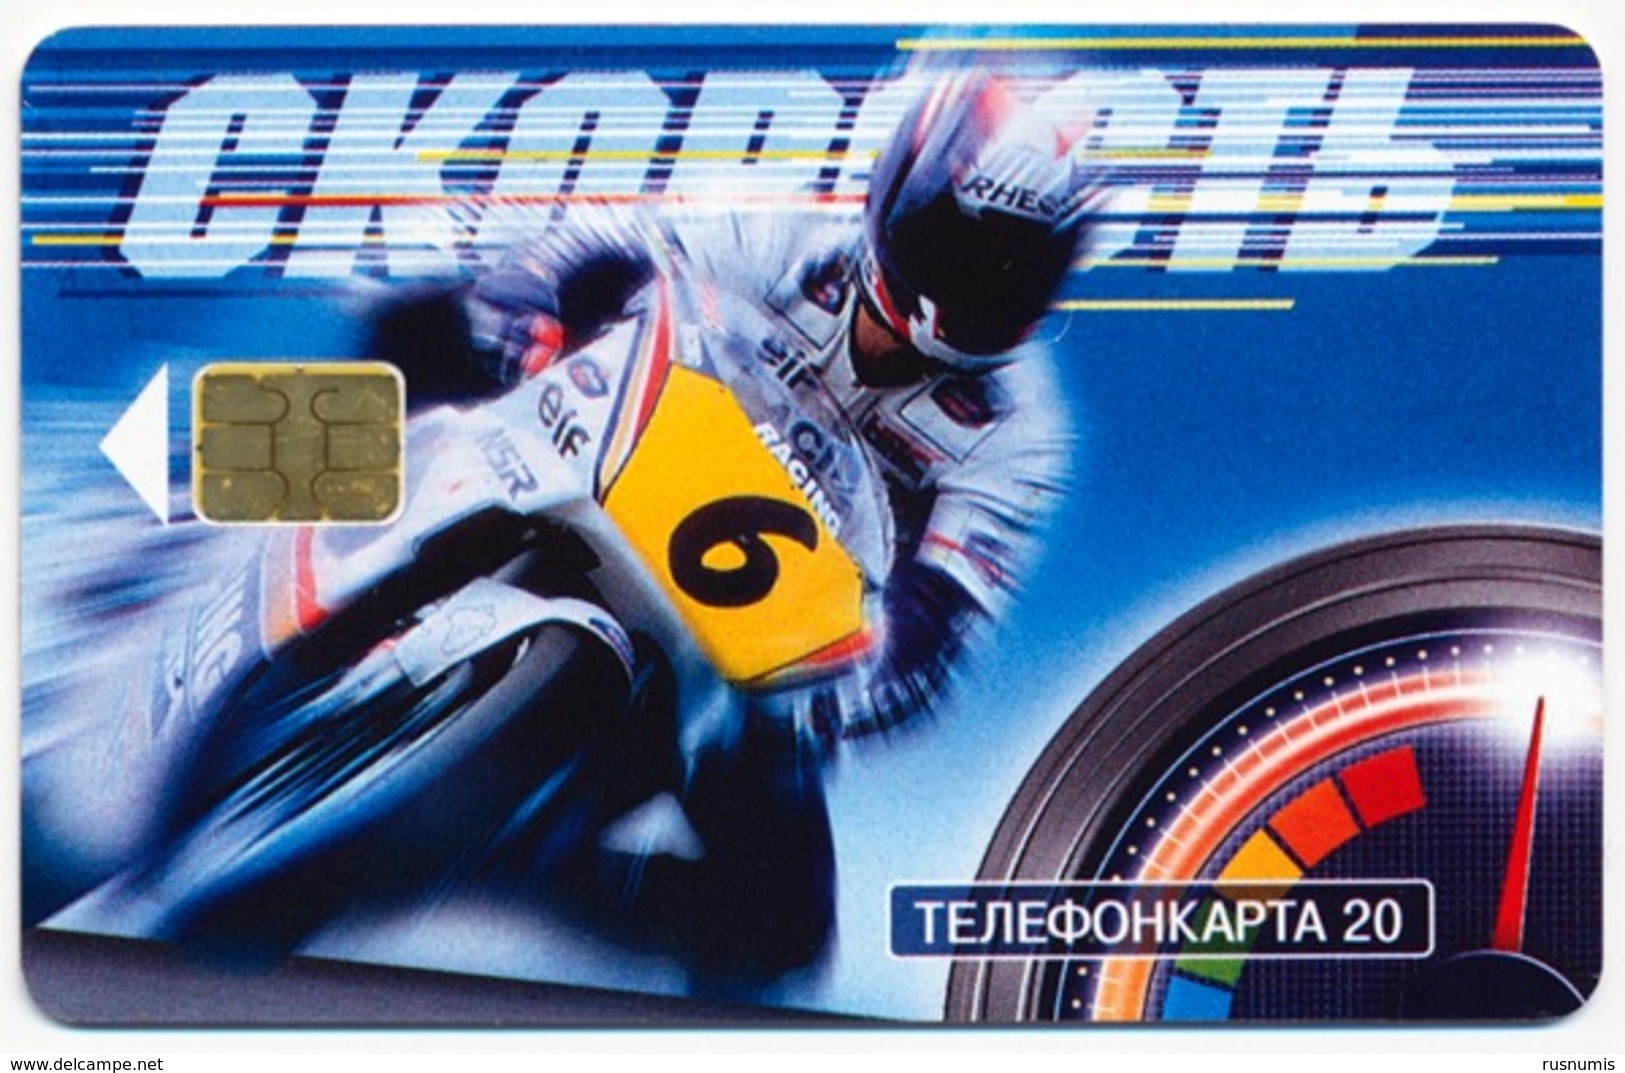 RUSSIA - RUSSIE - RUSSLAND MGTS 20 UNITS COMPLETE SET 4 PHONECARD TELECARTE SPEED SPORT RACE CAR BOAT BIKE QTY 50.000 - Russland